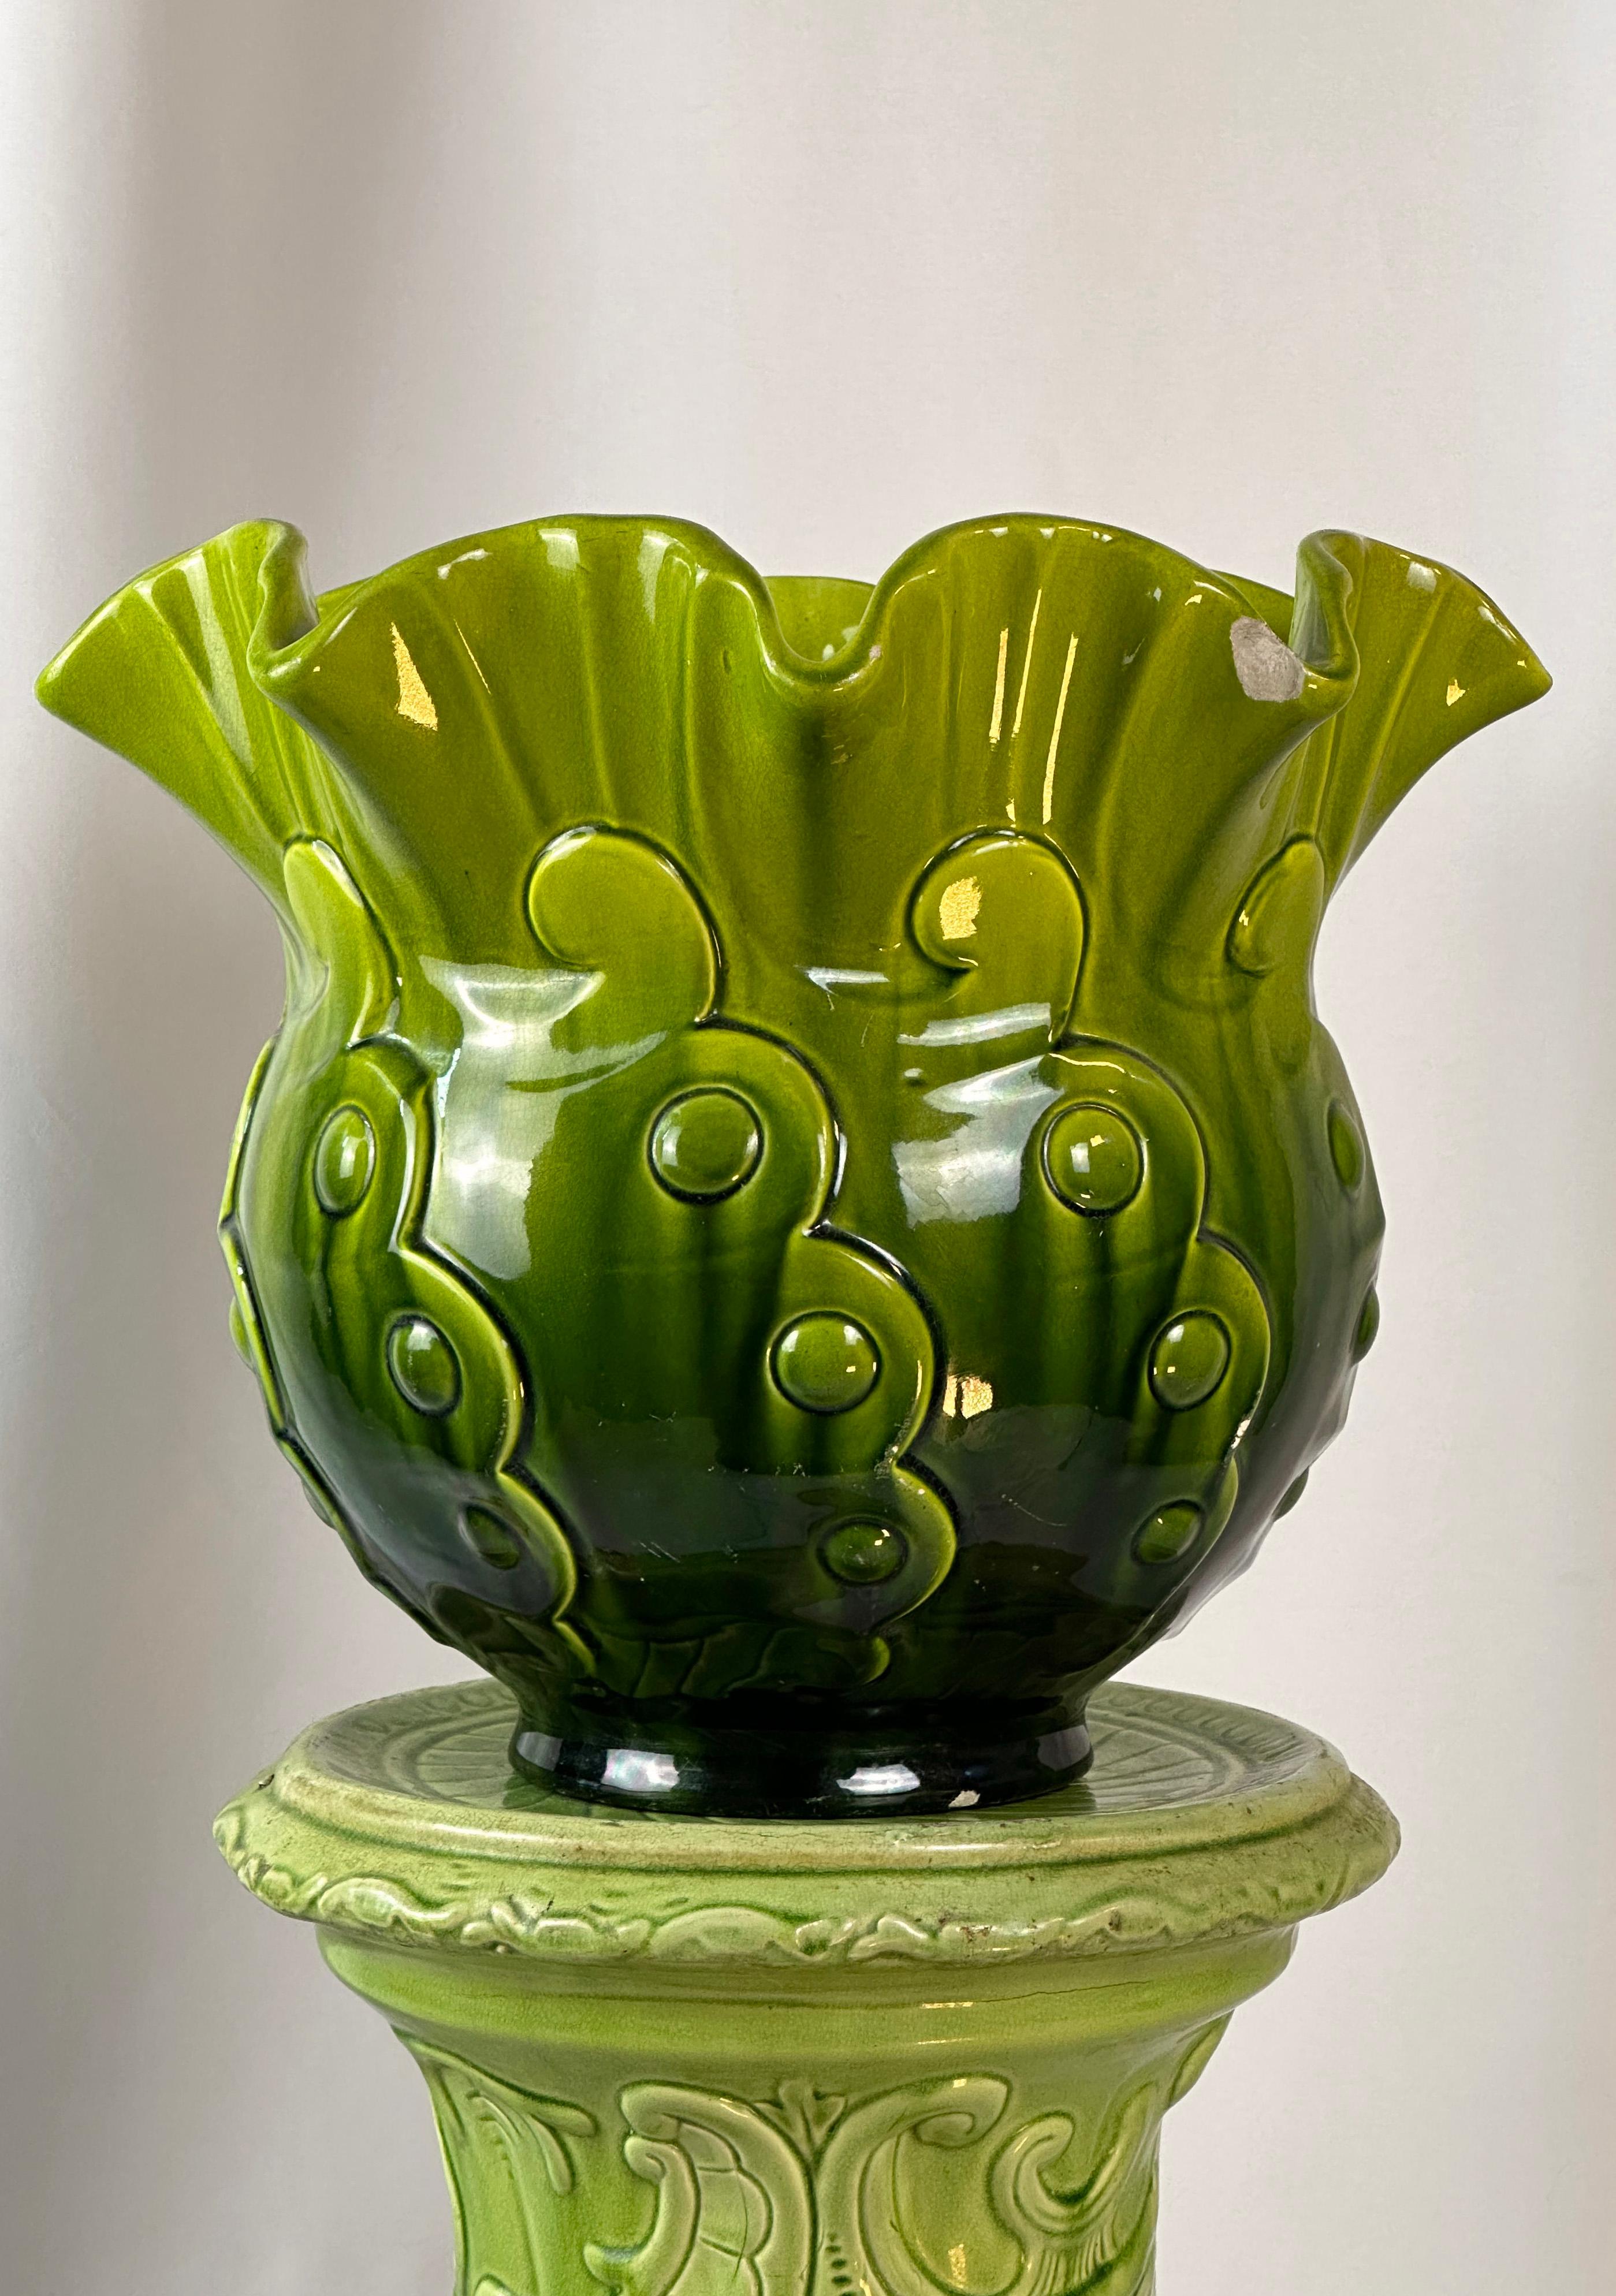 
A magnificent green Majolica jardiniere and pedestal, a true masterpiece of craftsmanship dating back to around 1890 by the renowned Bretby.

This impressive floor standing jardiniere exudes the timeless charm and elegance of the late 19th century.